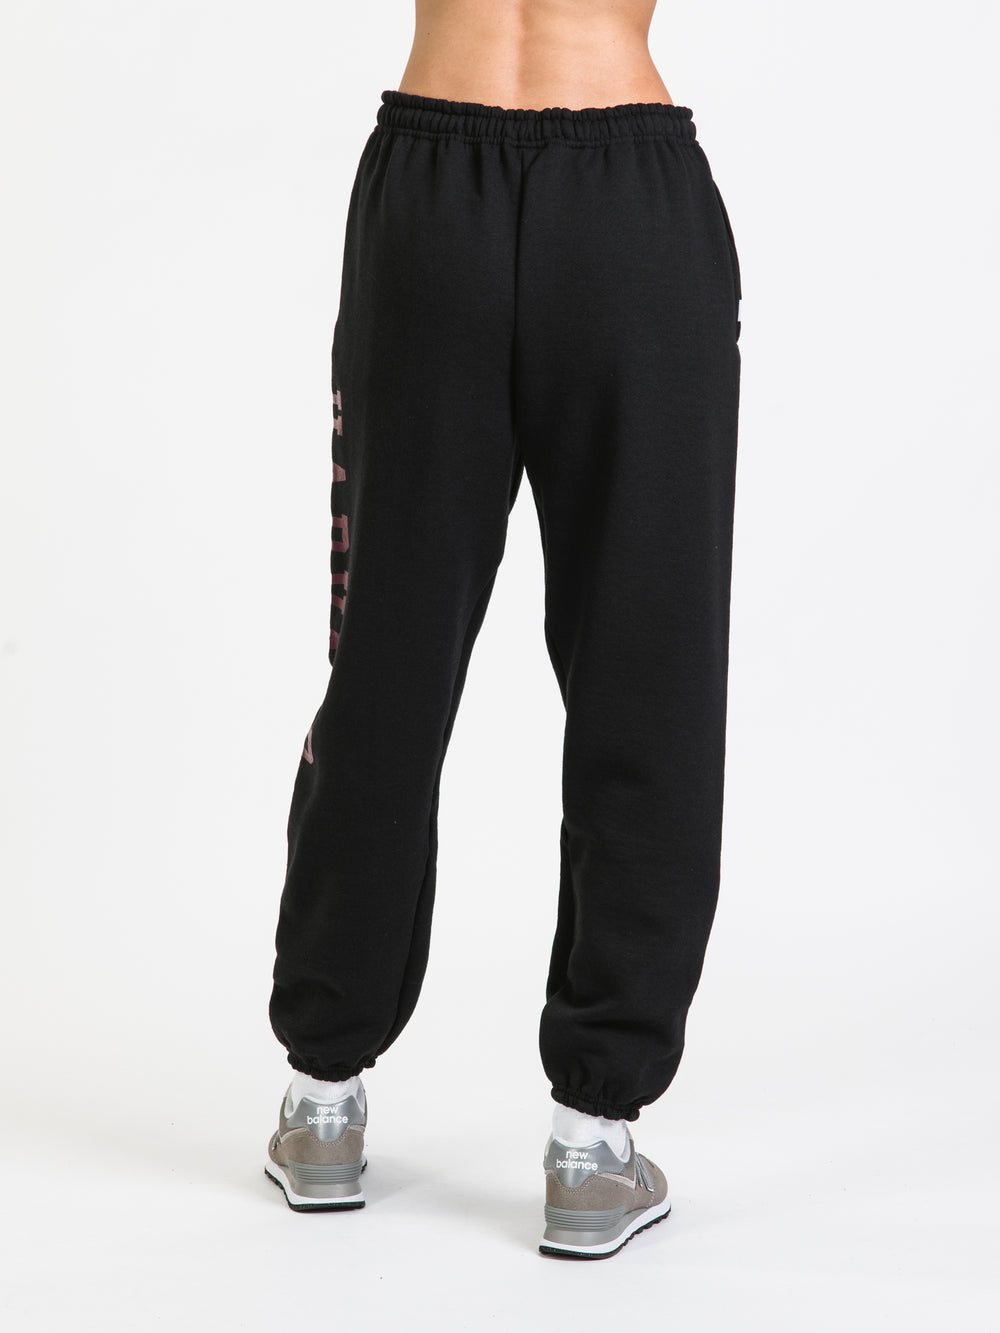 RUSSELL HARVARD SWEATPANT  - CLEARANCE